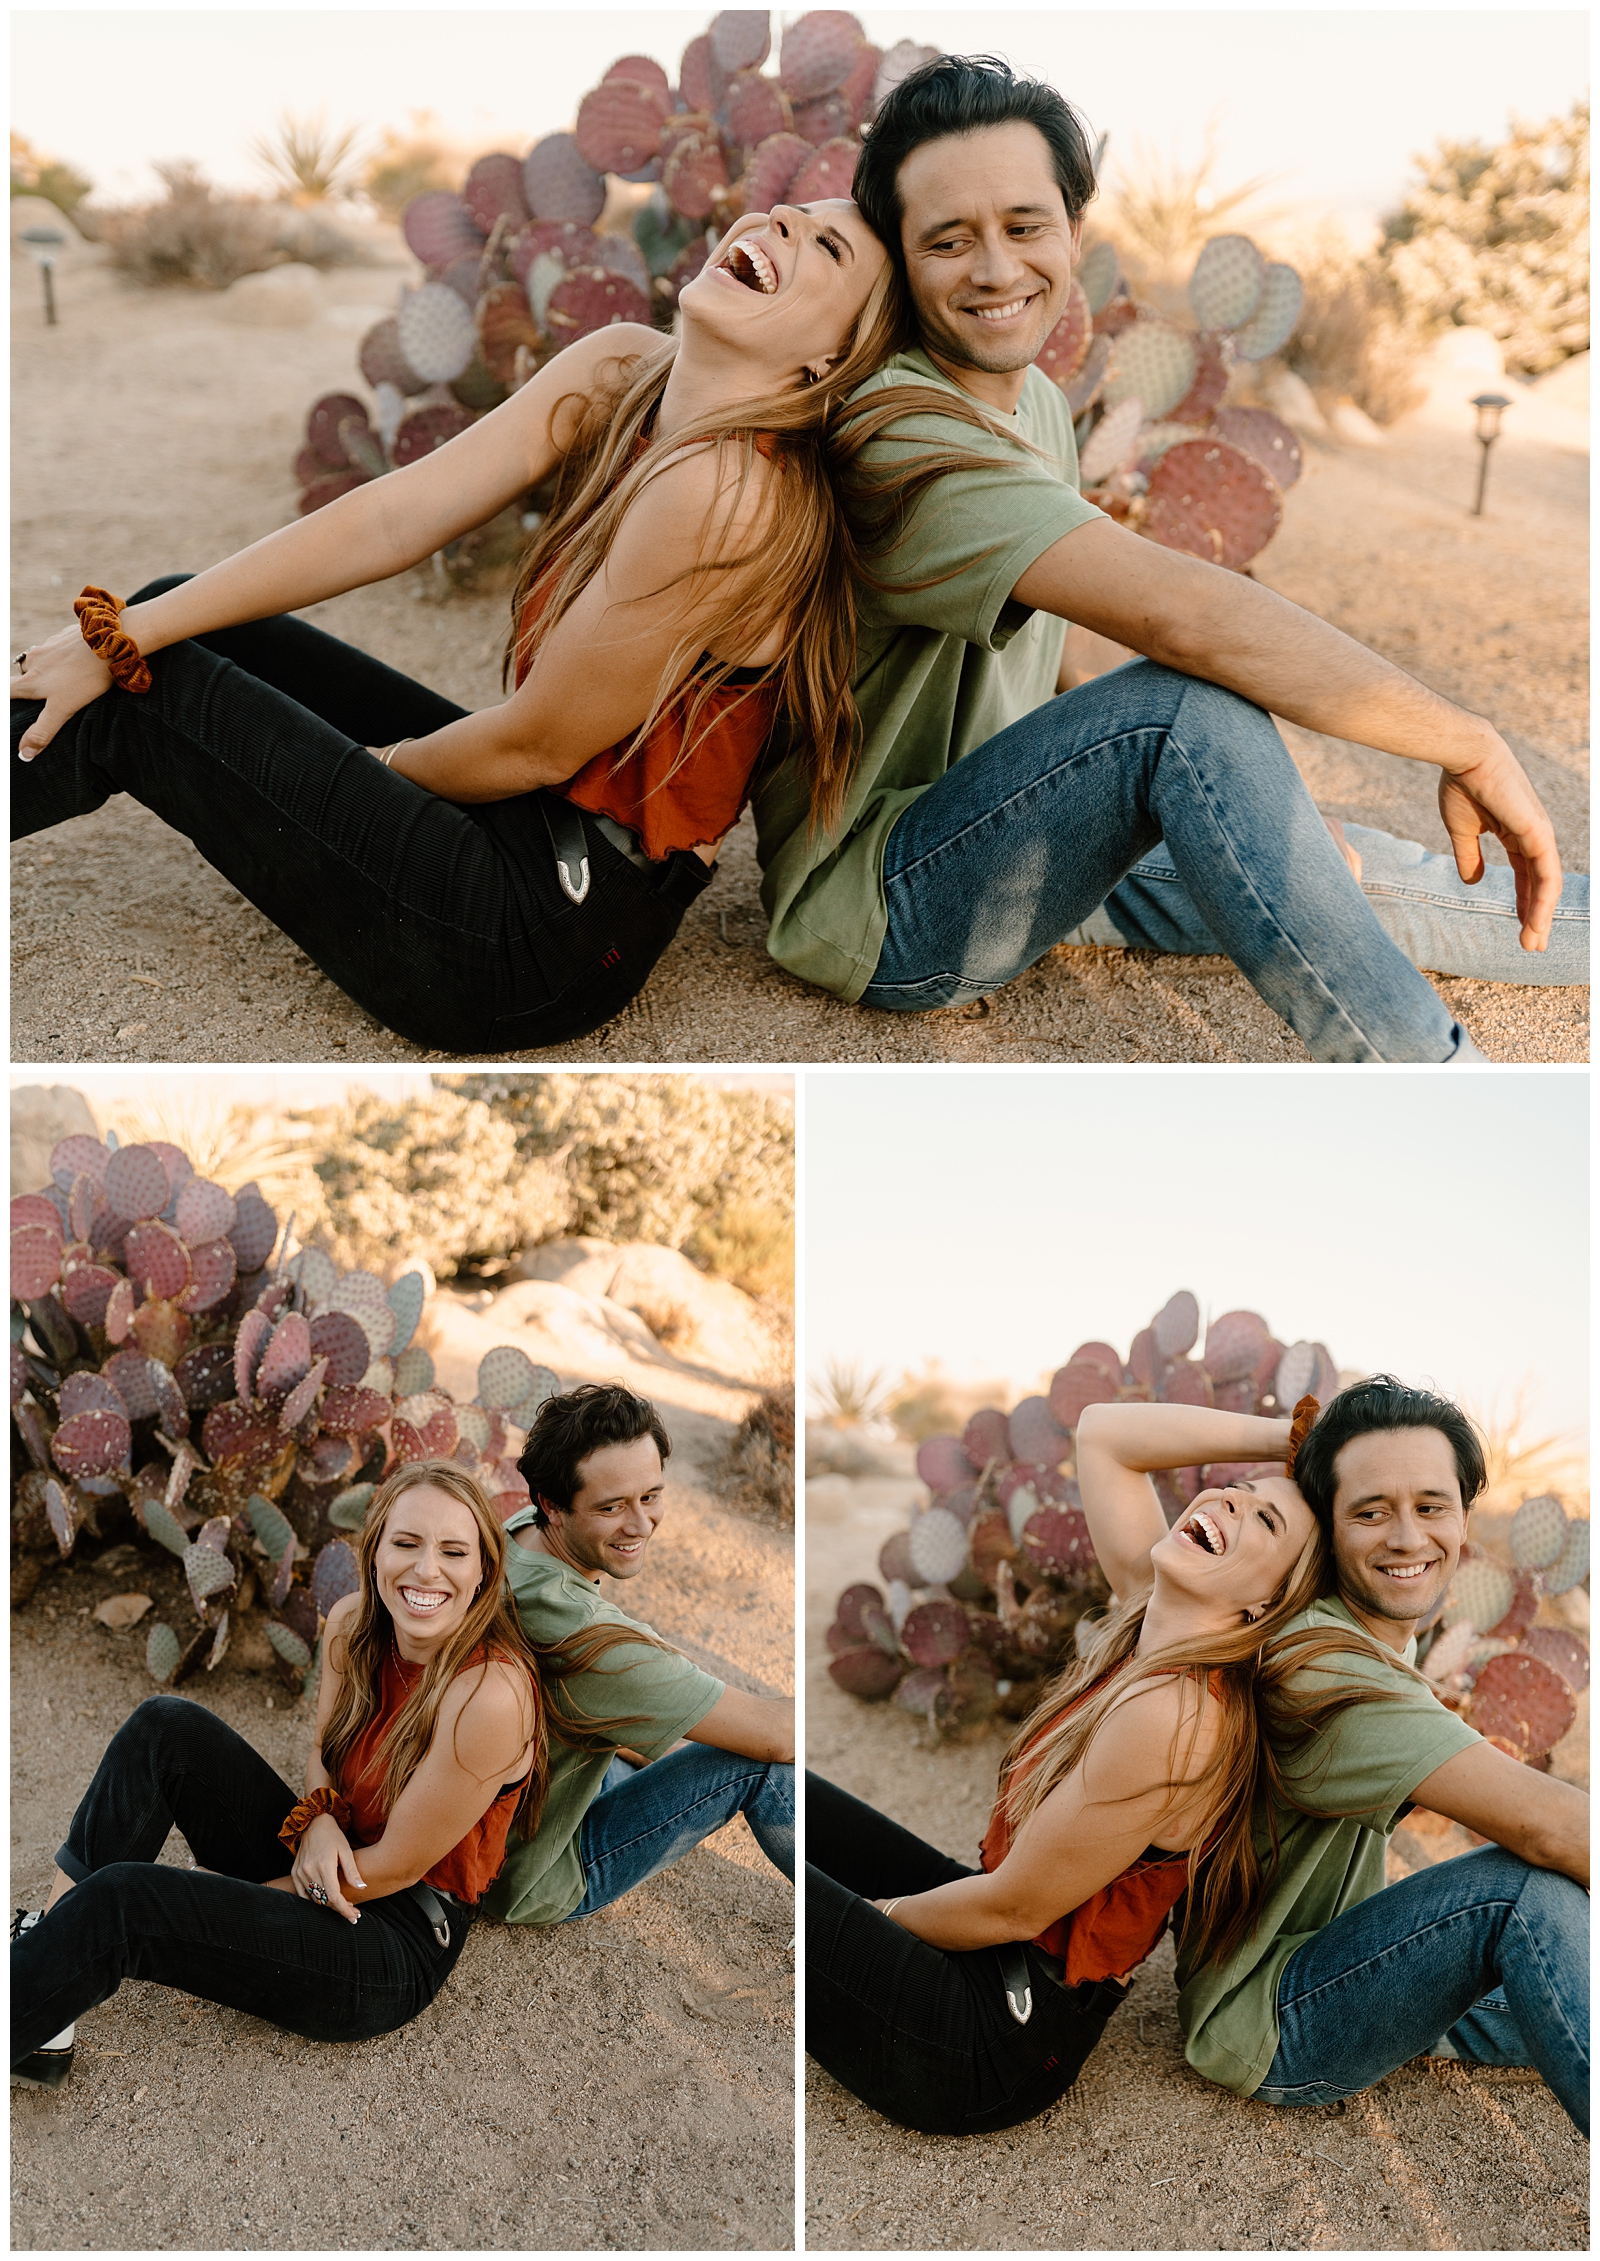 Fun and playful desert engagement session in Joshua Tree, CA